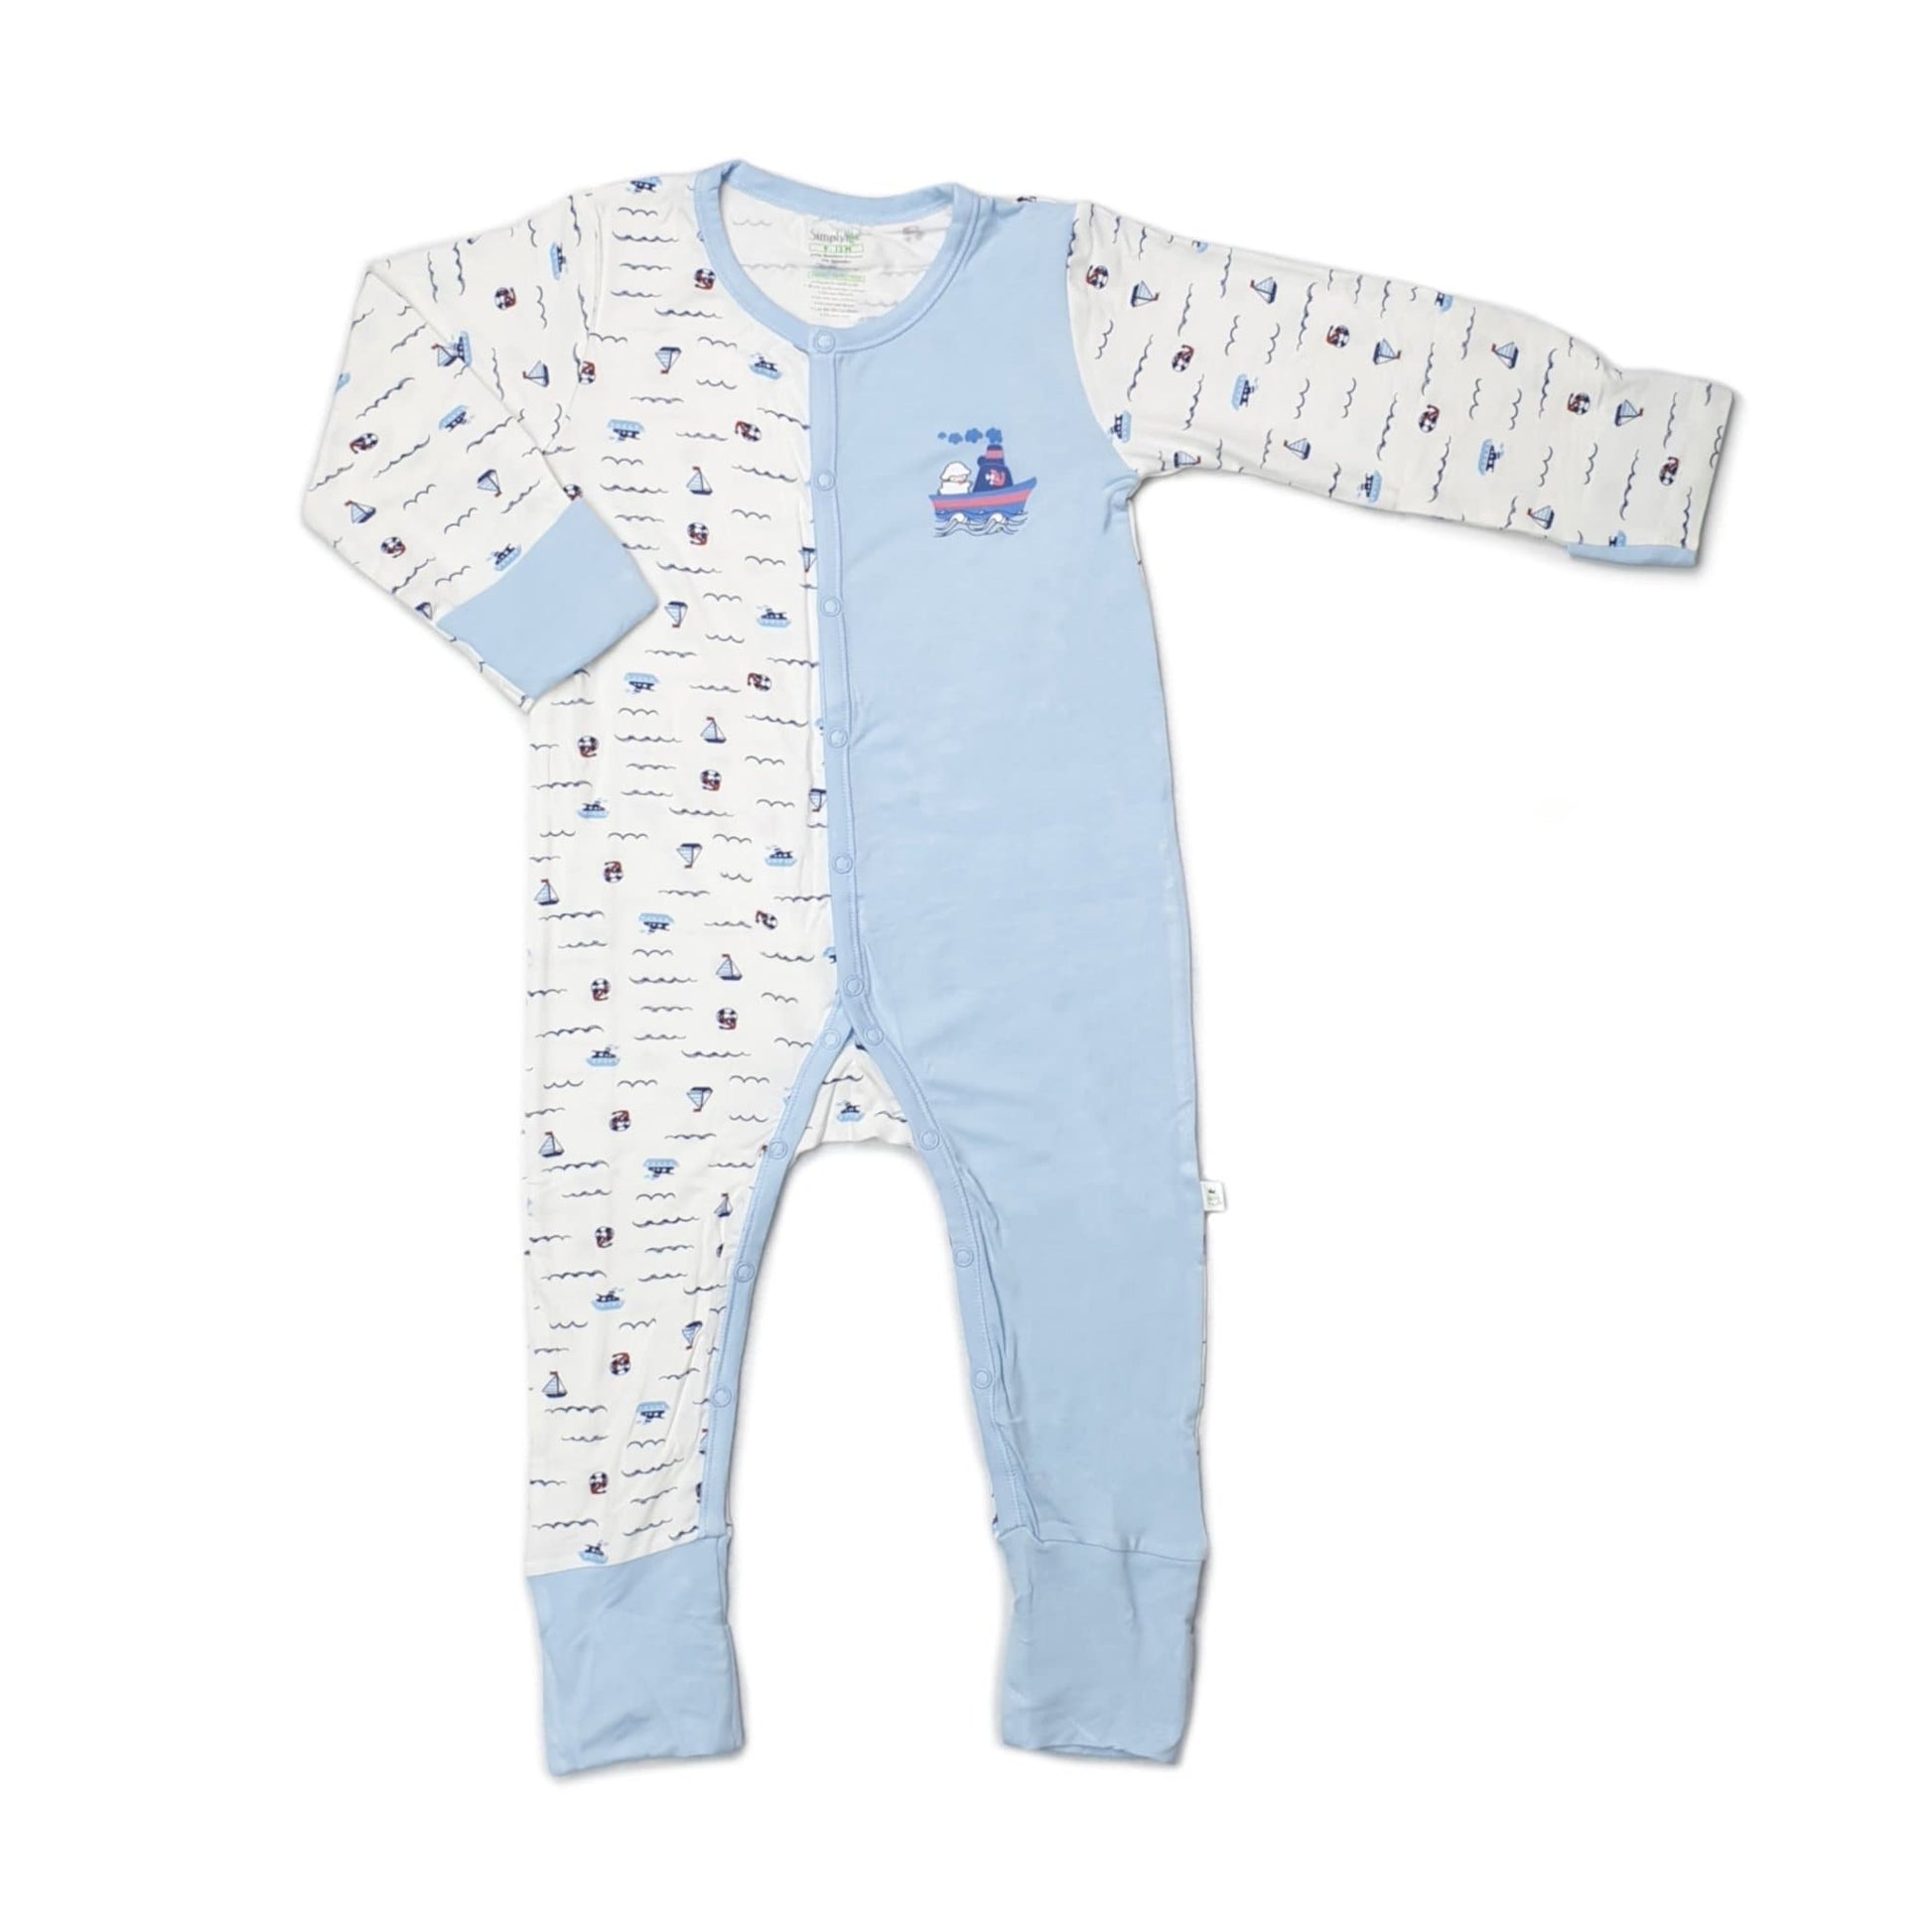 Sailing - Long-sleeved Button Sleepsuit with Folded Mittens & Footie (Spot Print) by simplylifebaby